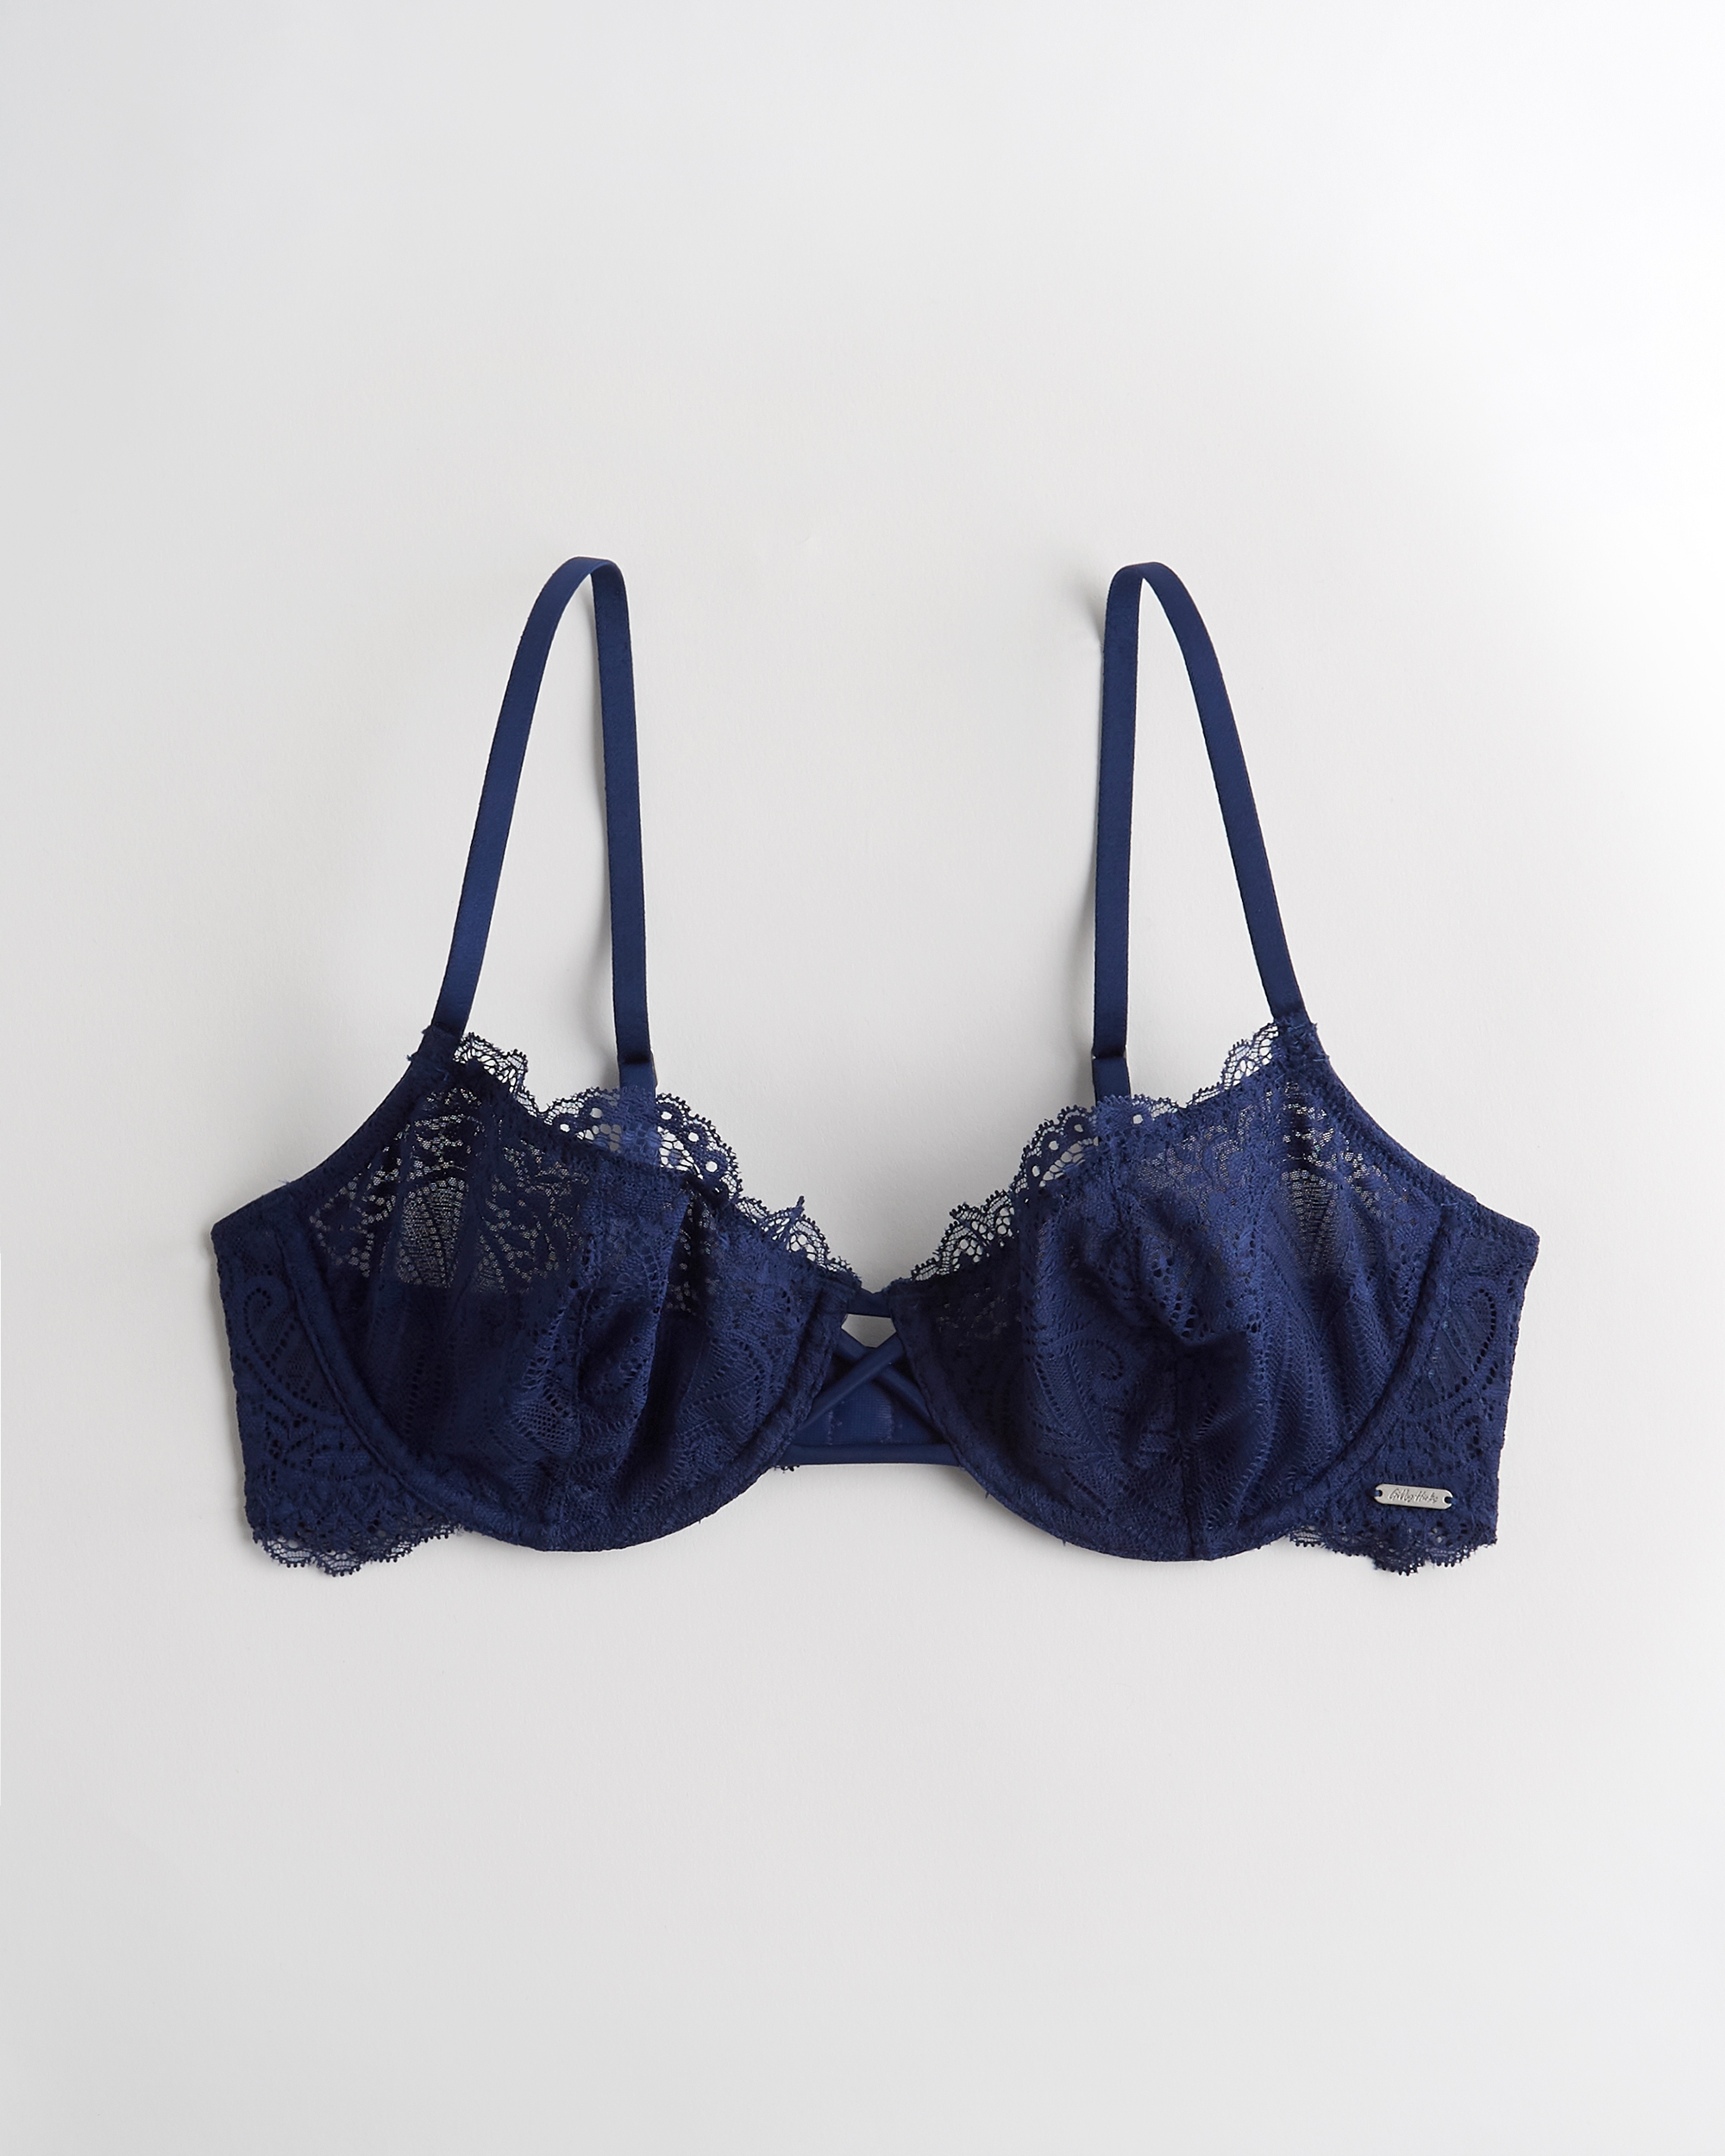 Unlined | Hollister Co.